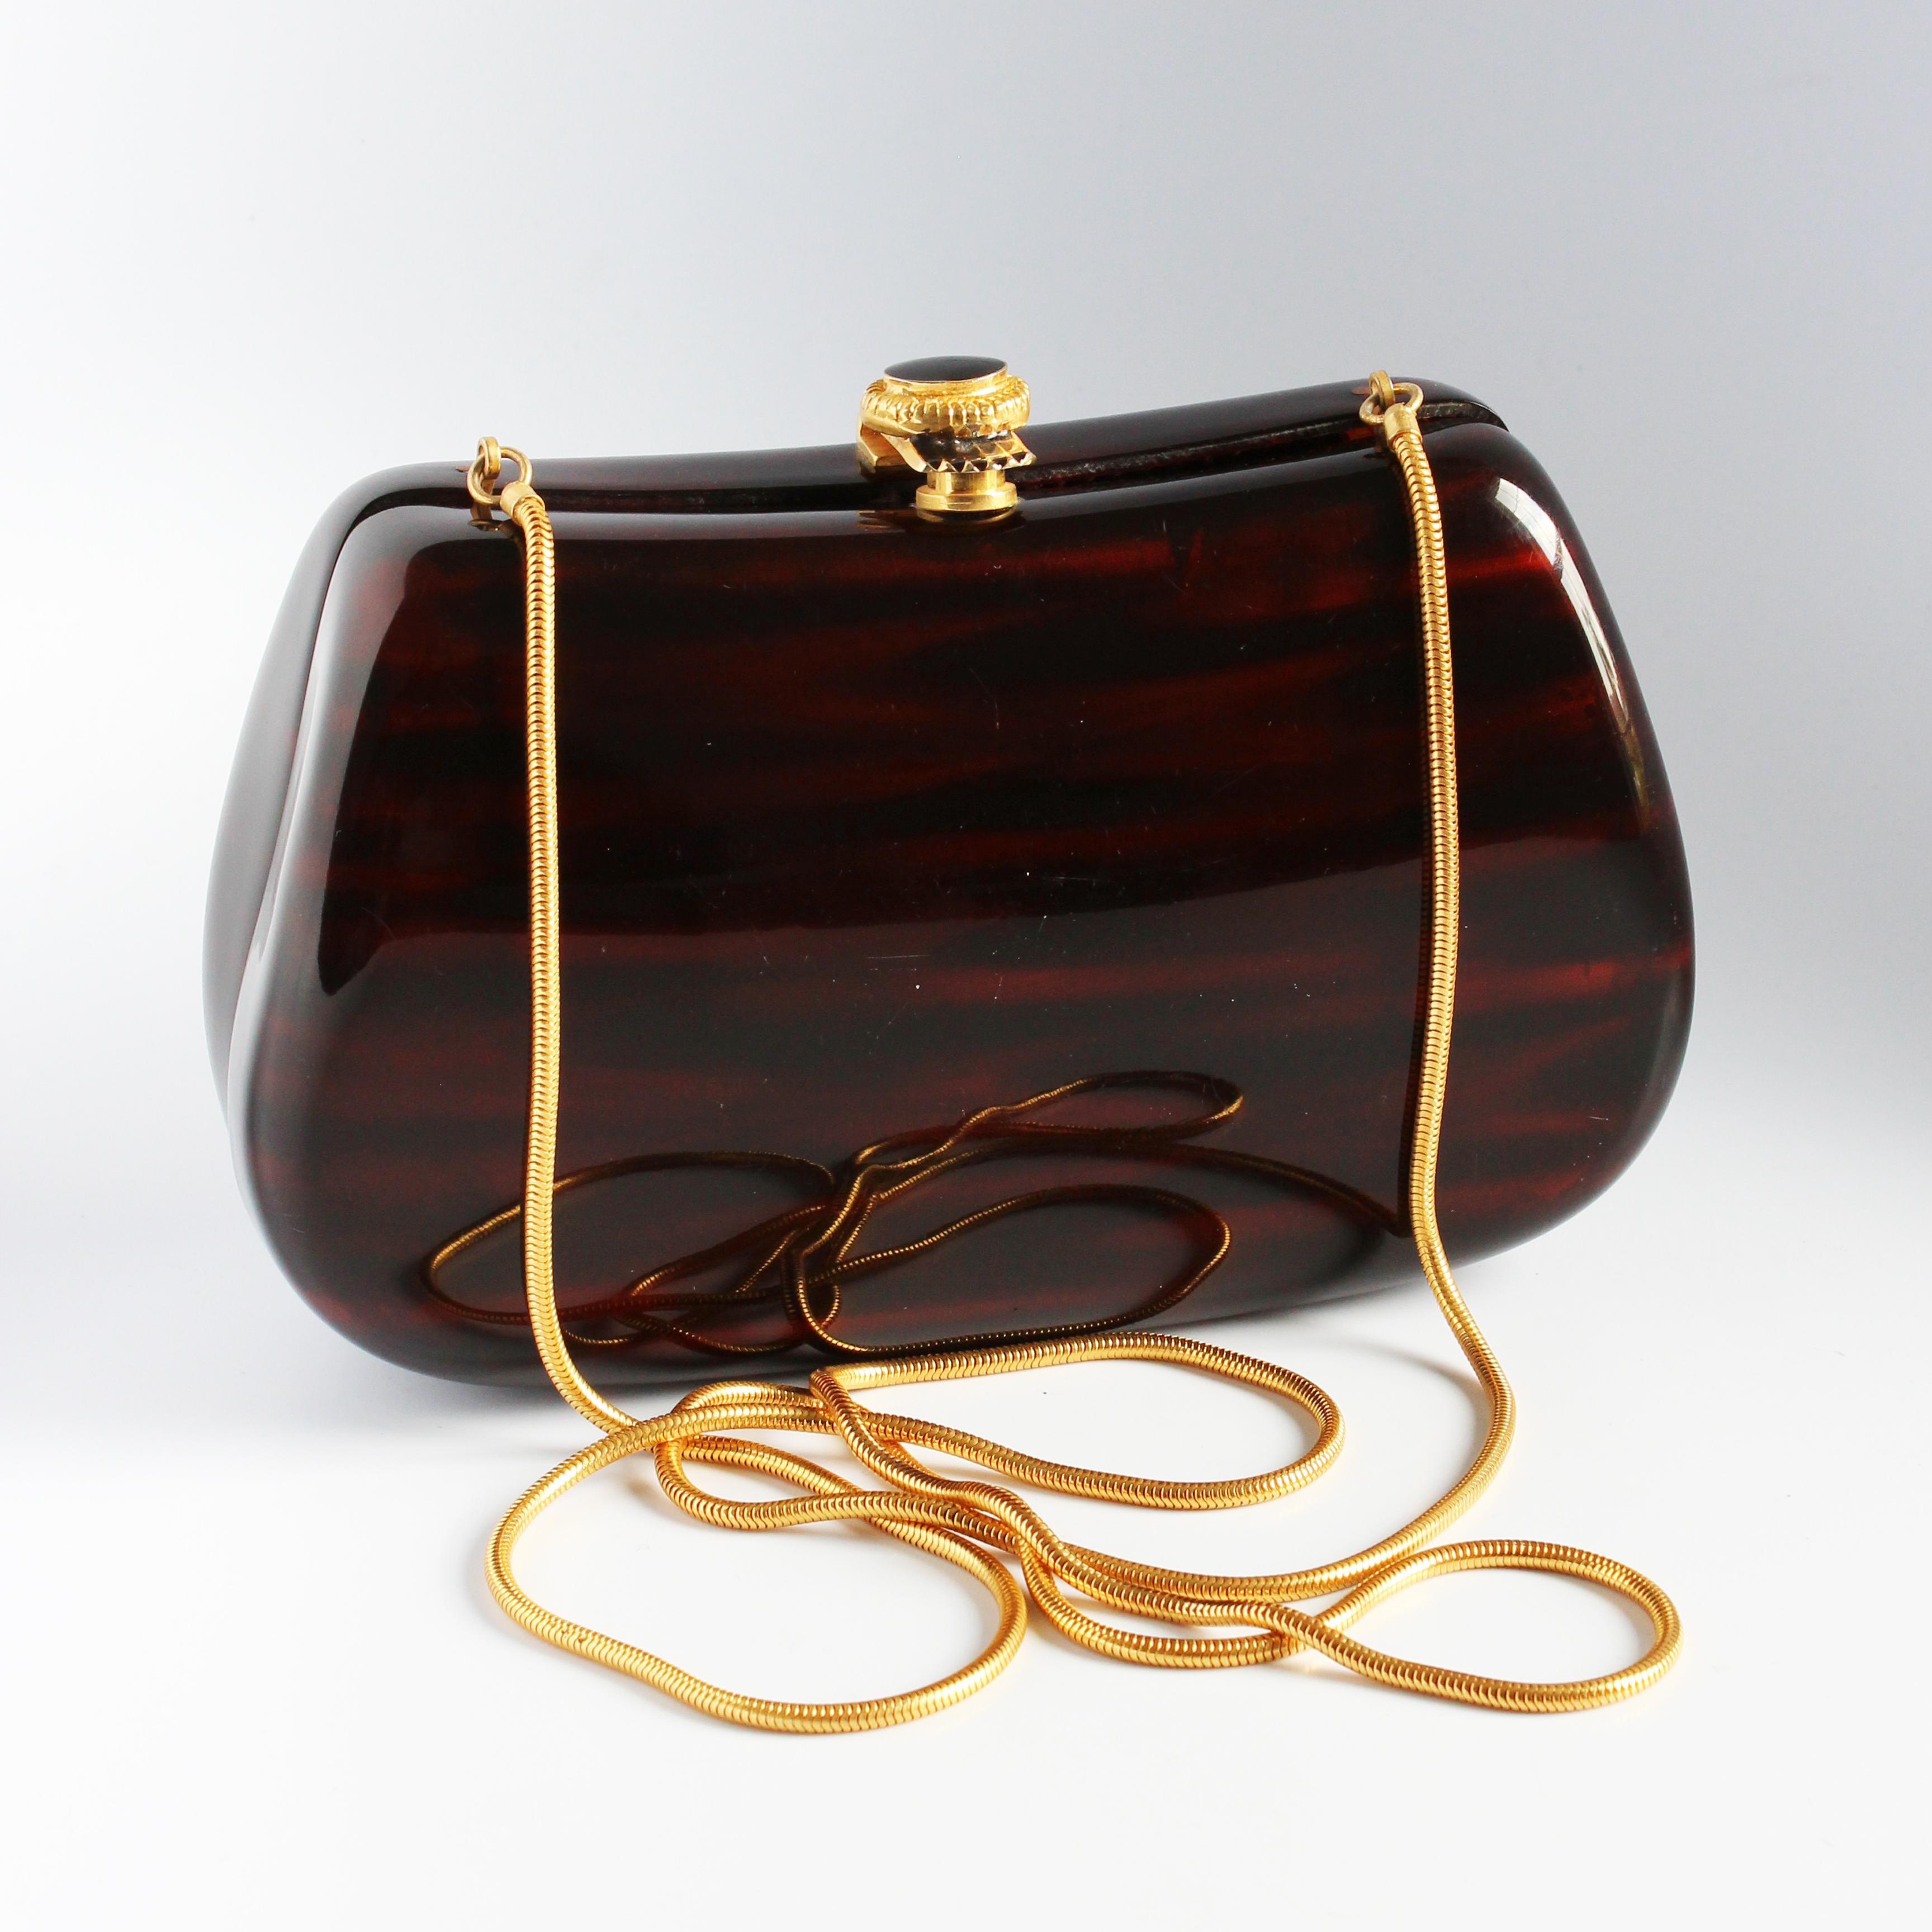 Vintage evening bag or minaudière, made for Saks Fifth Avenue, most likely in the late 1960s.  Made from polished resin made to resemble wood, it features a decorative gold metal and enamel clasp closure and a gold coil chain that can be used for